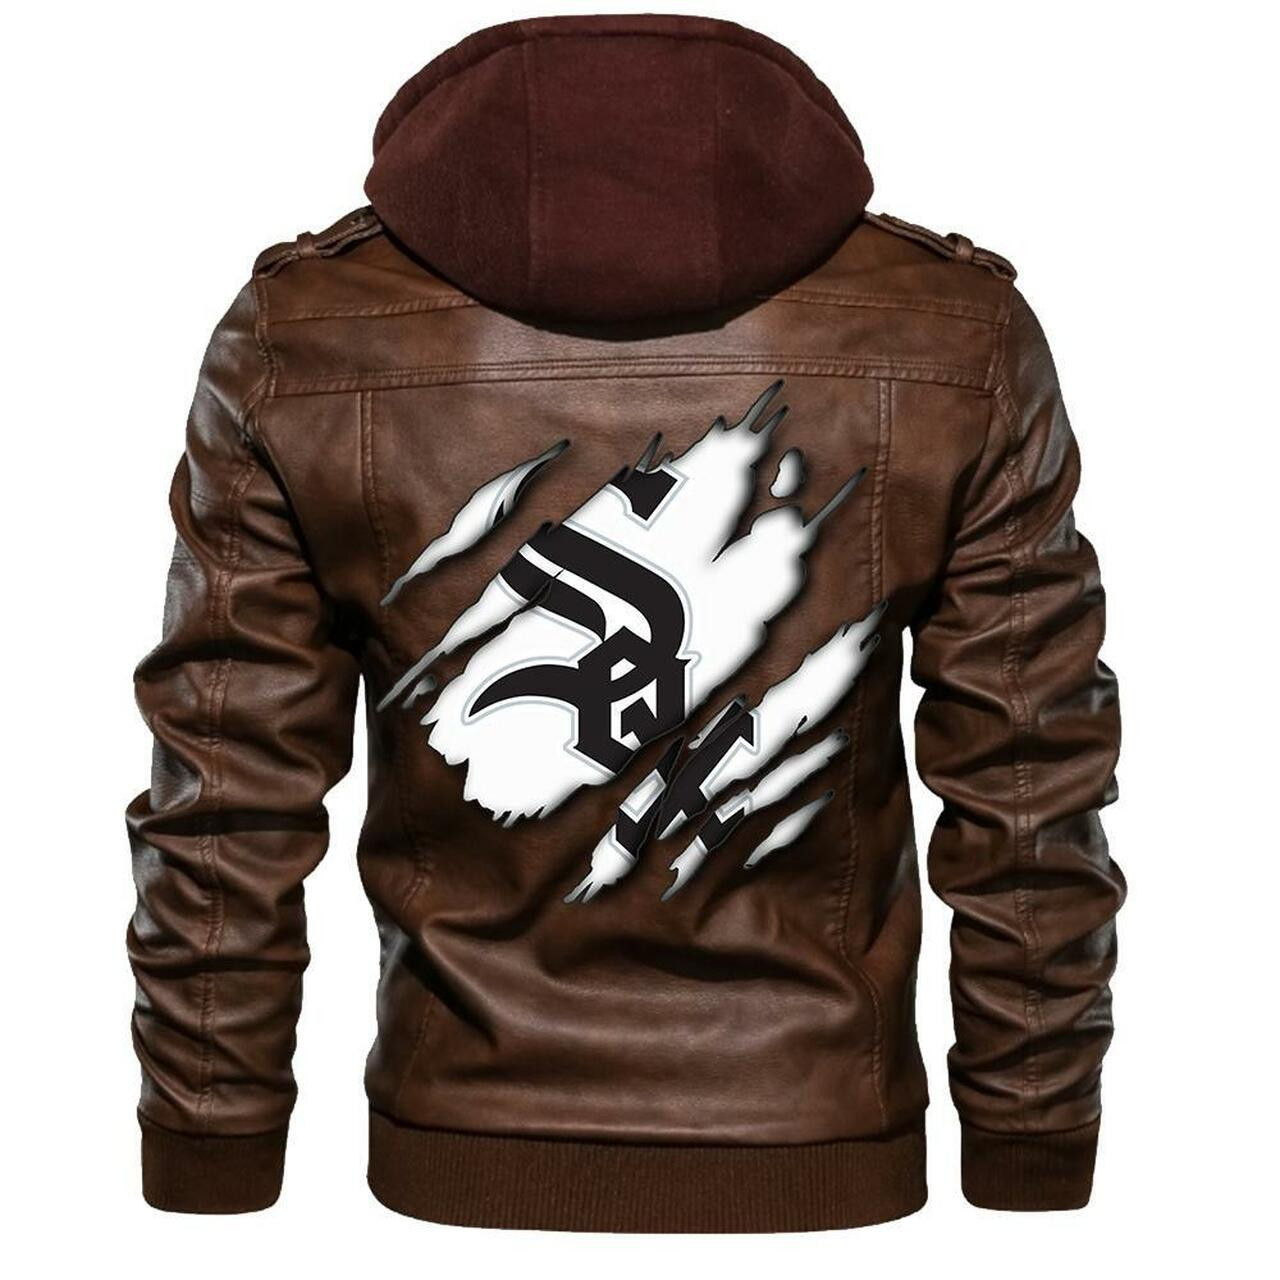 These Amazing Leather Jacket will add to the appeal of your outfit 75